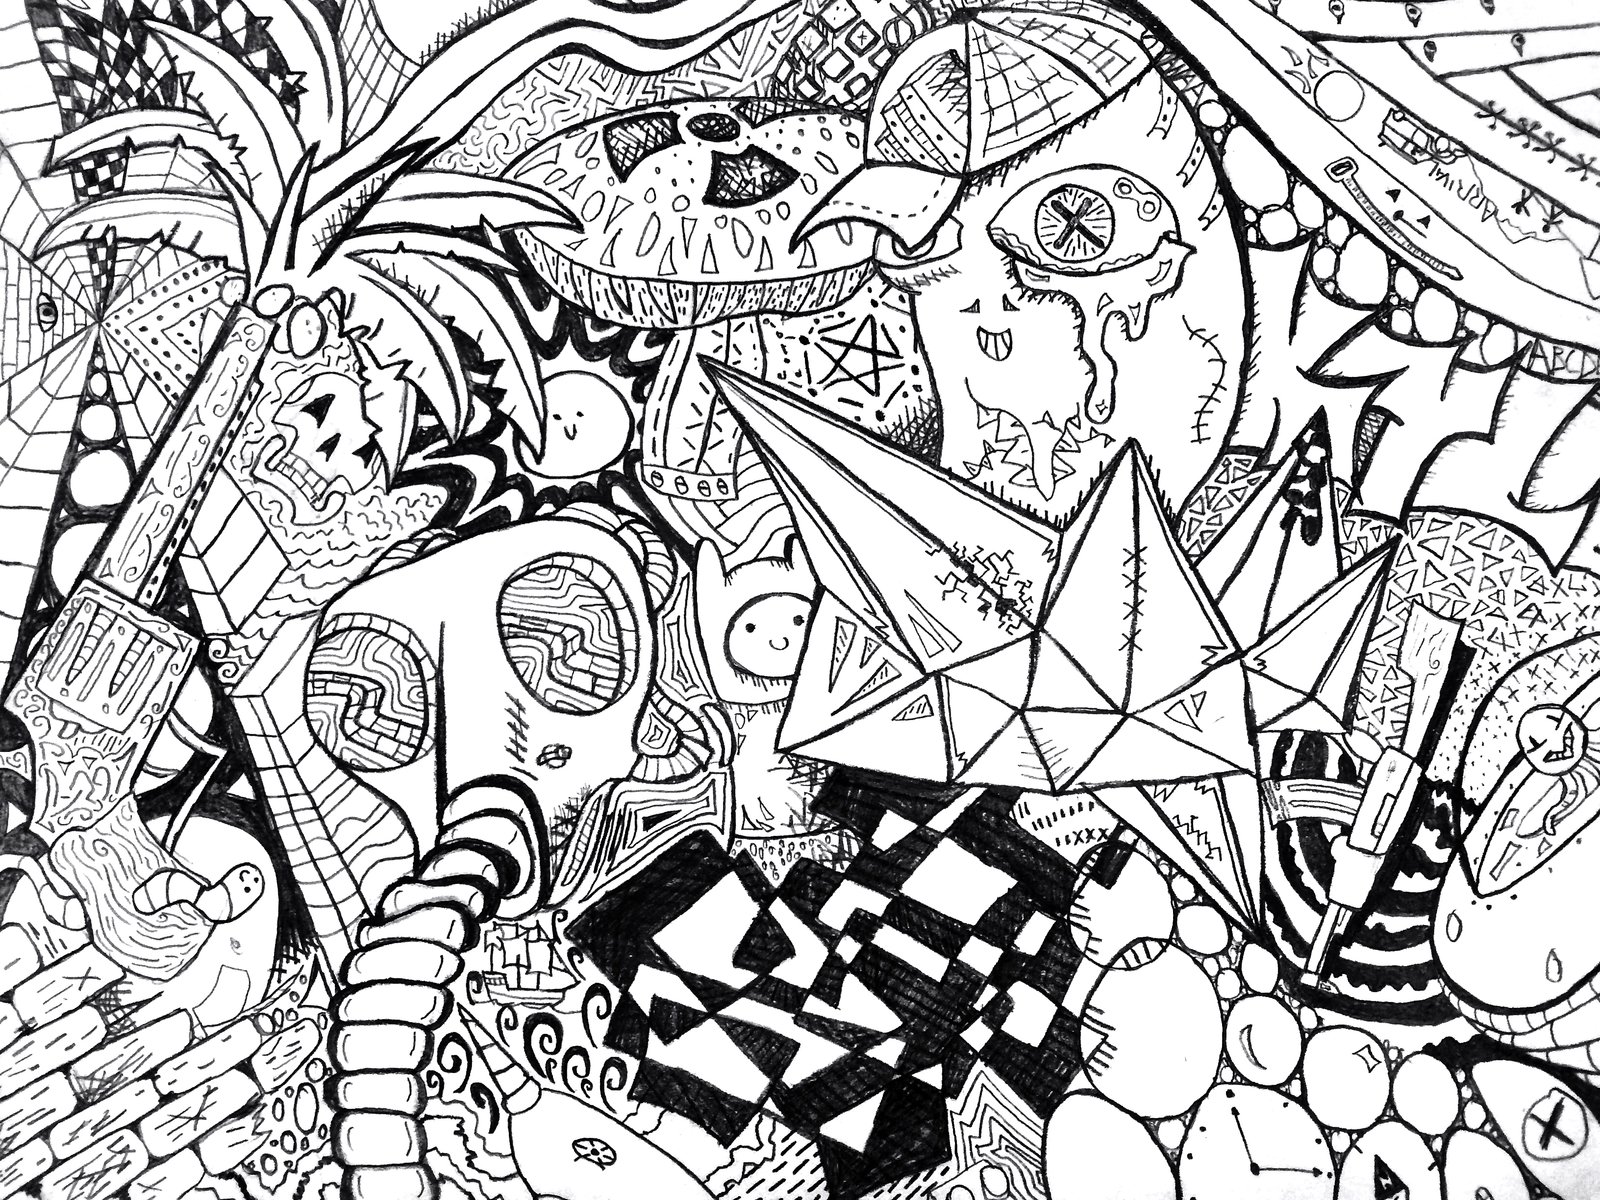 Streaming Consciousness Drawing By Legodoorz - Stream Of Consciousness Drawing - HD Wallpaper 